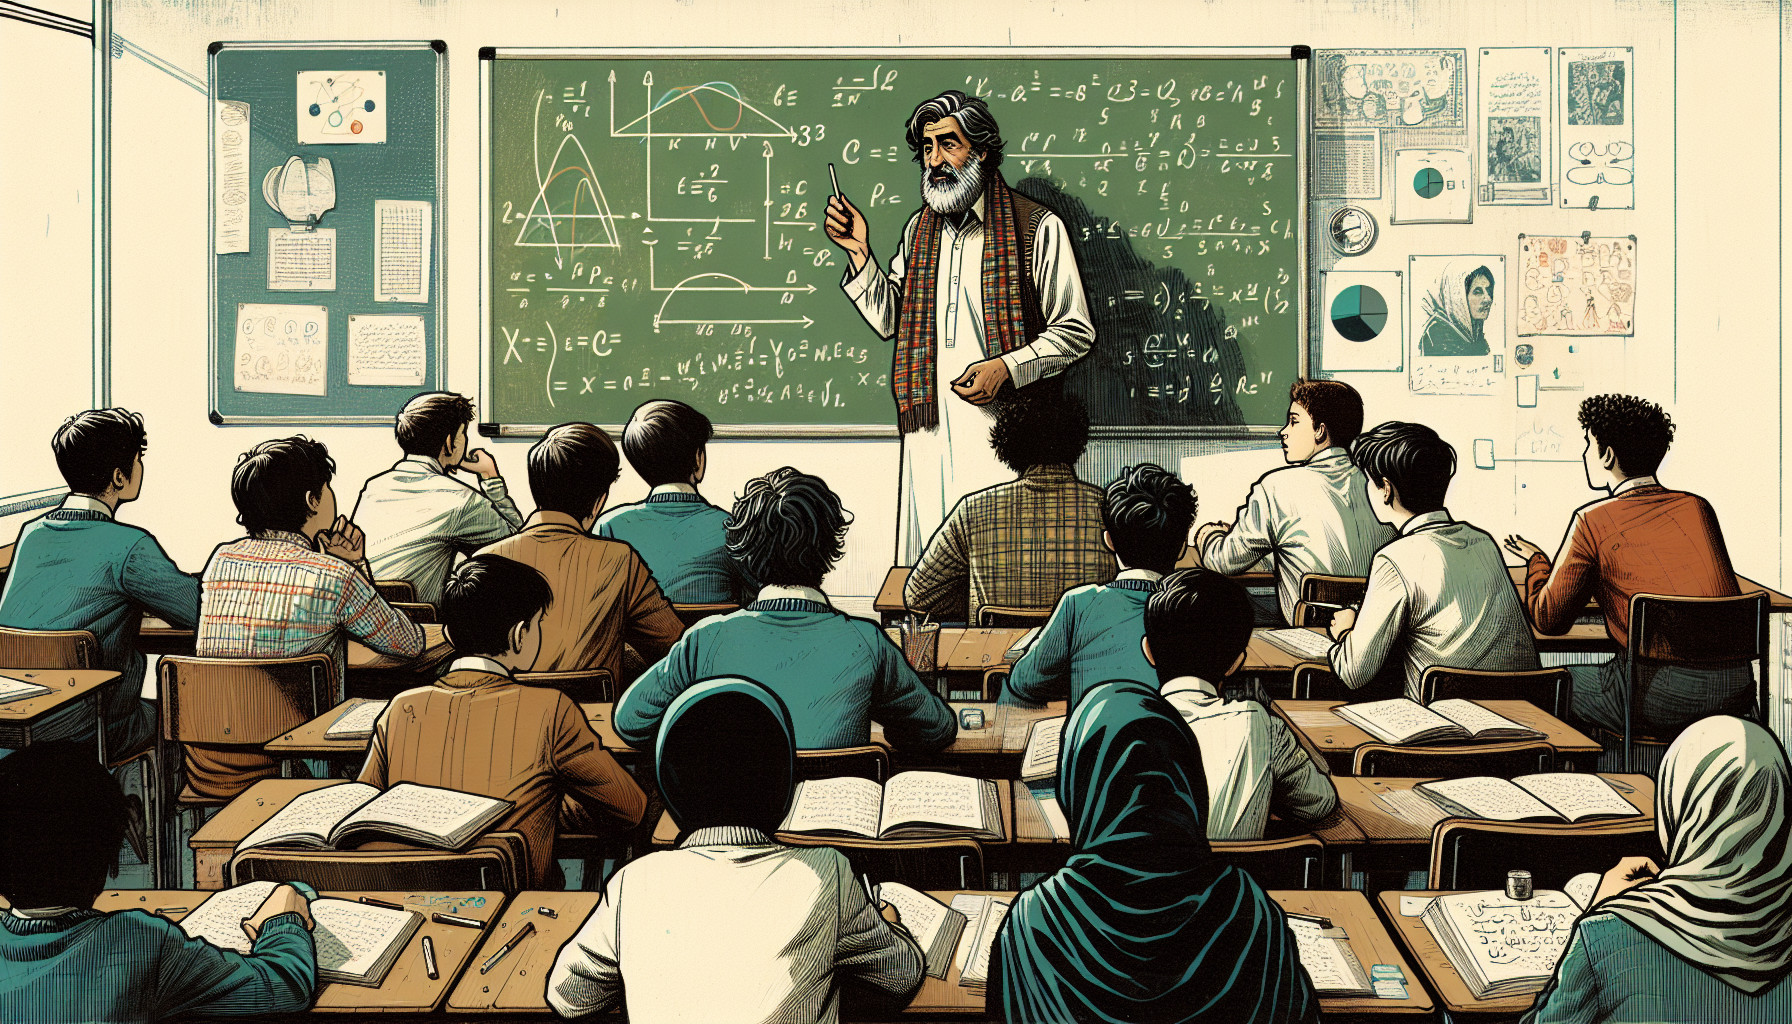 Illustration of a classroom with a teacher and students